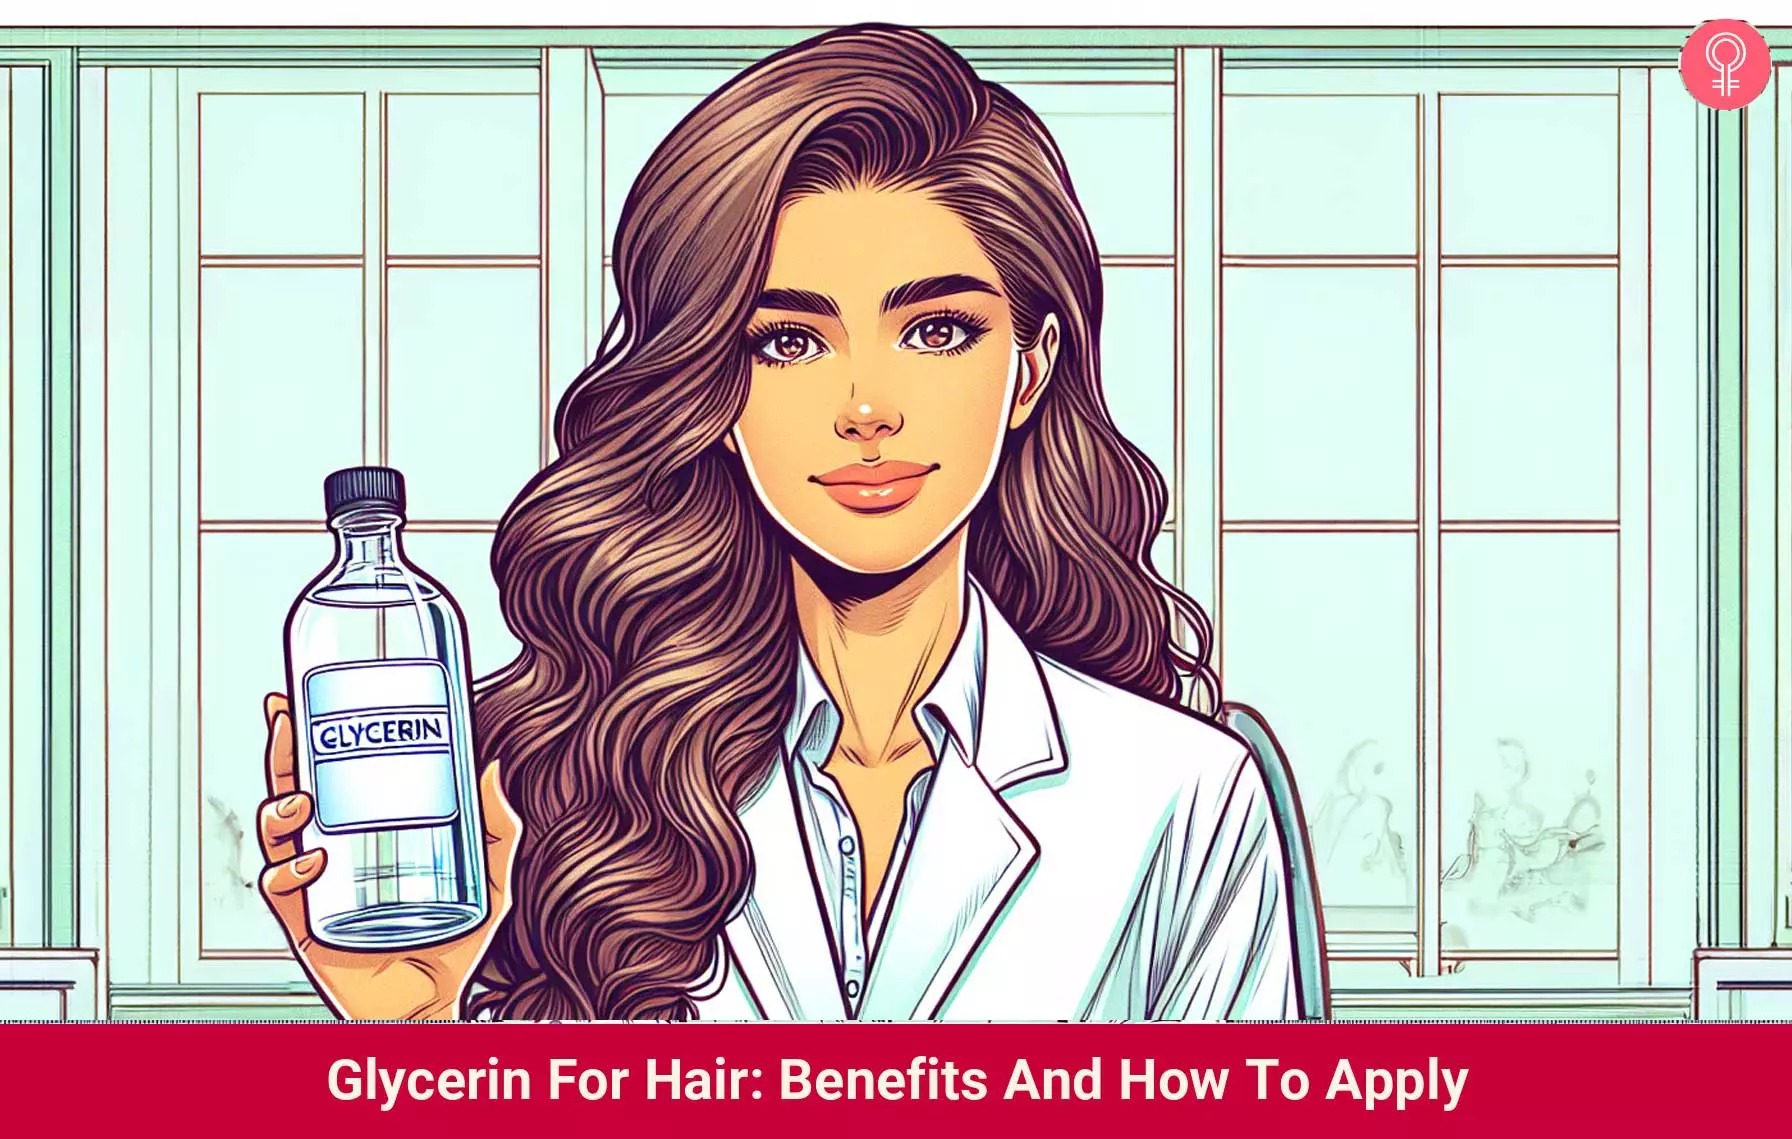 Glycerin For Hair: Benefits And How To Apply